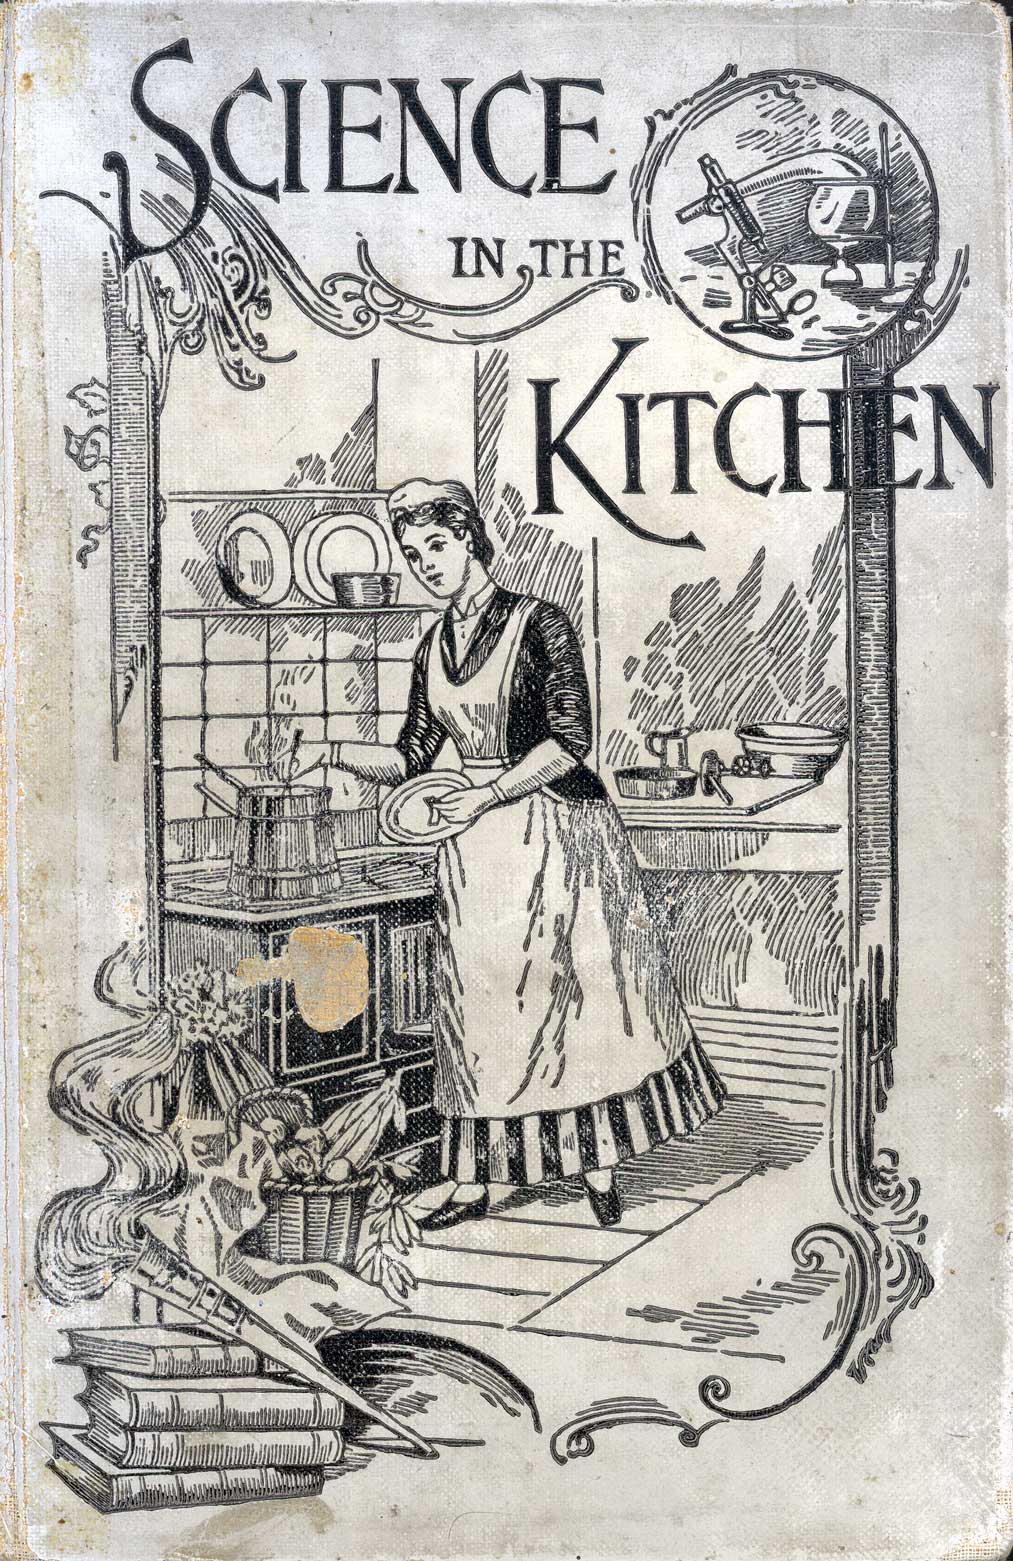 Science in the kitchen : a scientific treatise on food substances and their dietetic properties, together with a practical explanation of the principles of healthful cookery, and a large number of original, palatable, and wholesome recipes